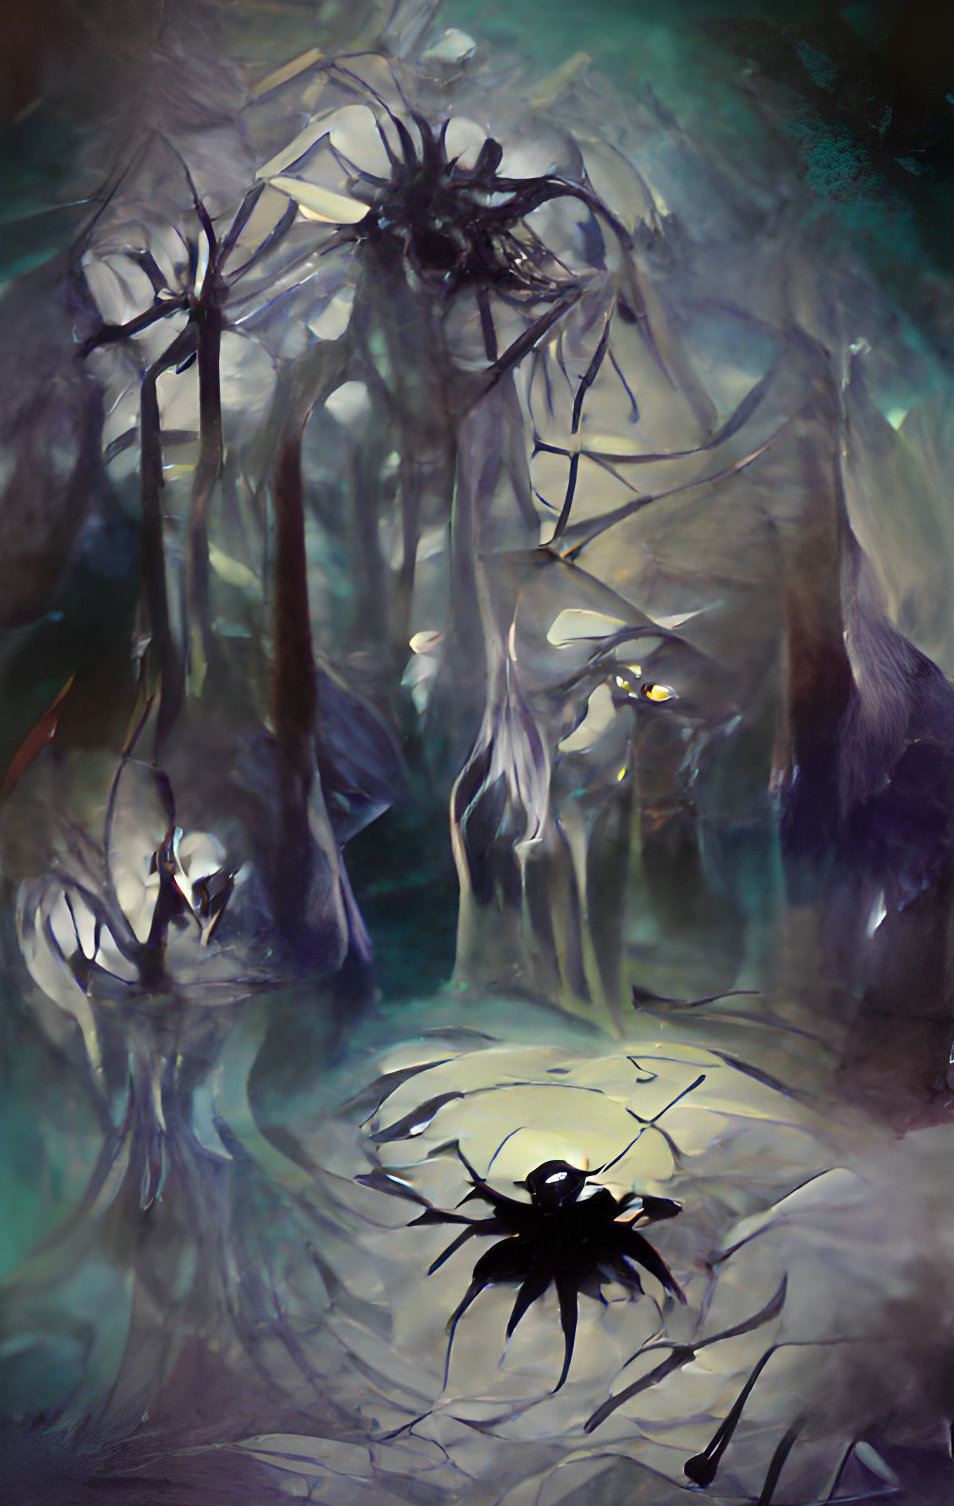 Dead Forest with Spiders